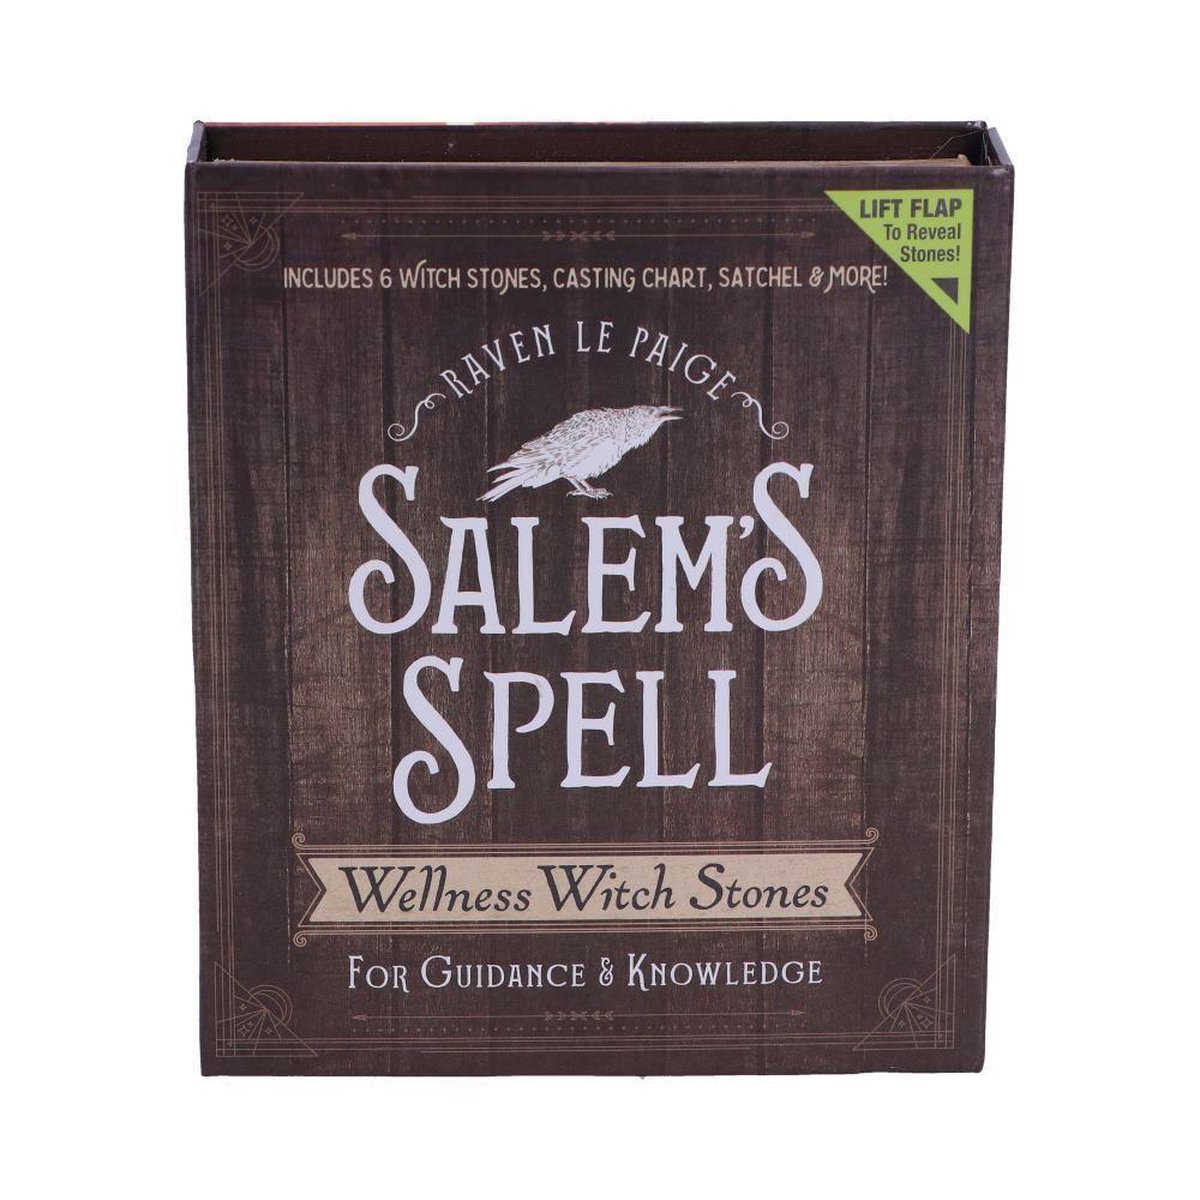 Nemesis Now - Salem's Spell Kit Set of Six Witches Wellness Stones in Decorated Box